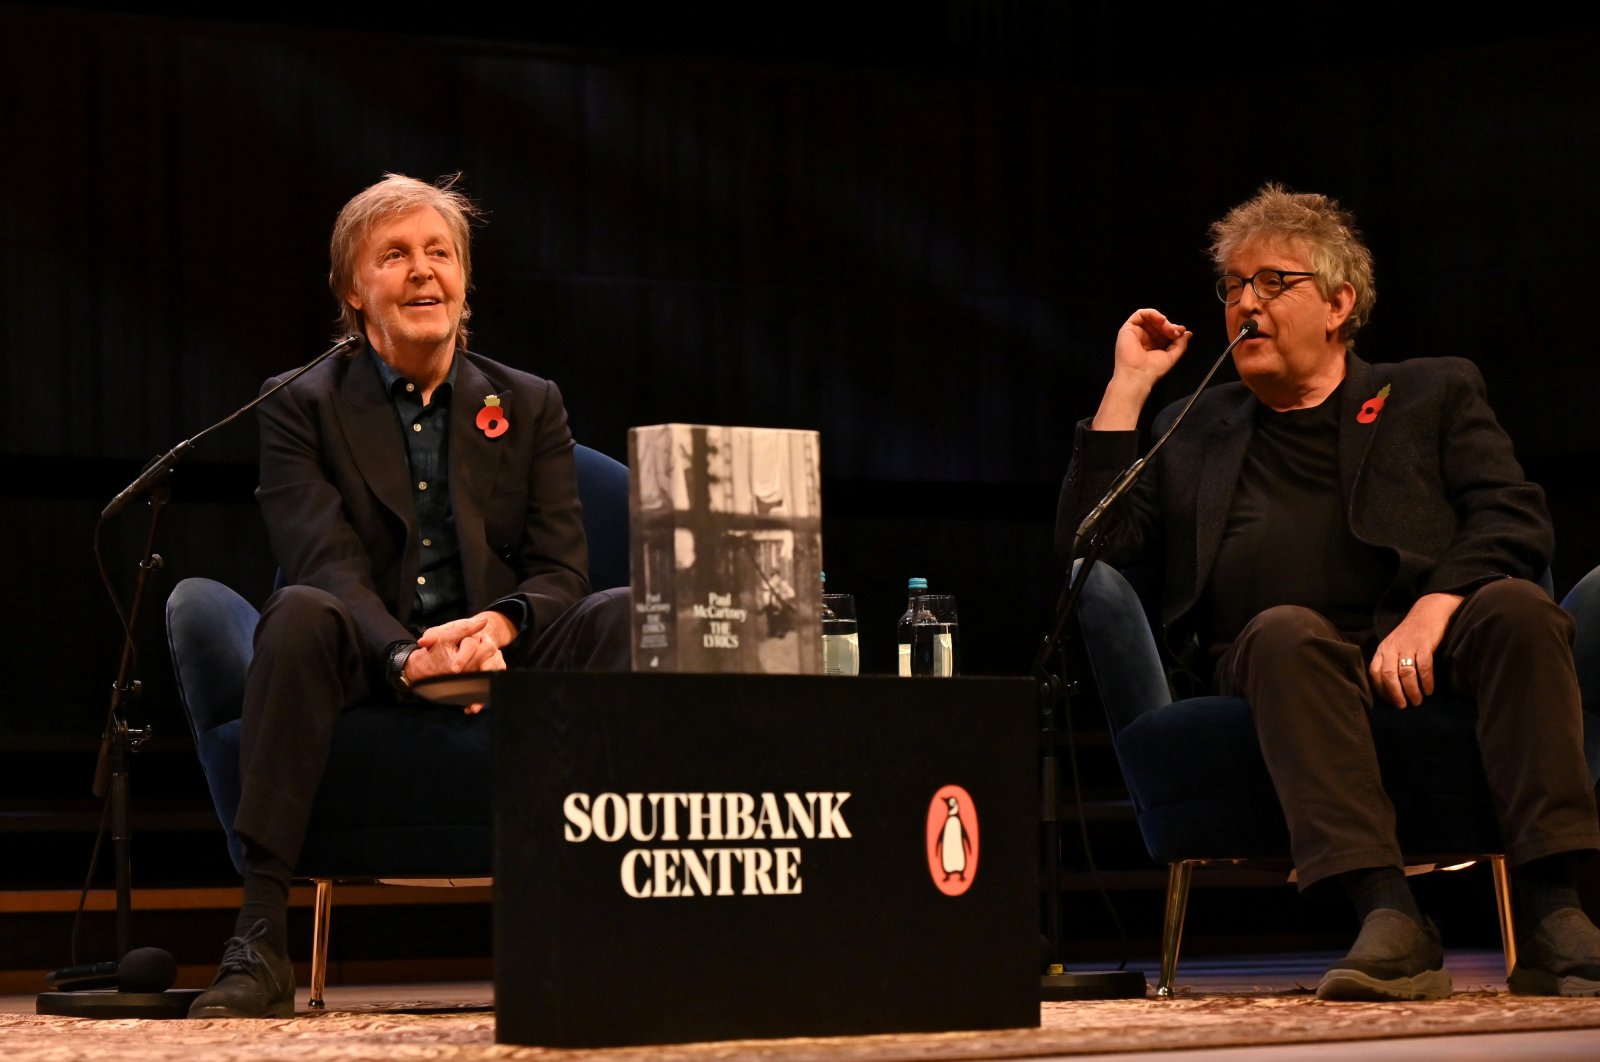 Paul McCartney is seen on stage at the Southbank's Royal Festival Hall in conversation with Paul Muldoon (editor) and Samira Ahmed (unseen) in London, Britain, Nov. 5, 2021. (Reuters Photo)